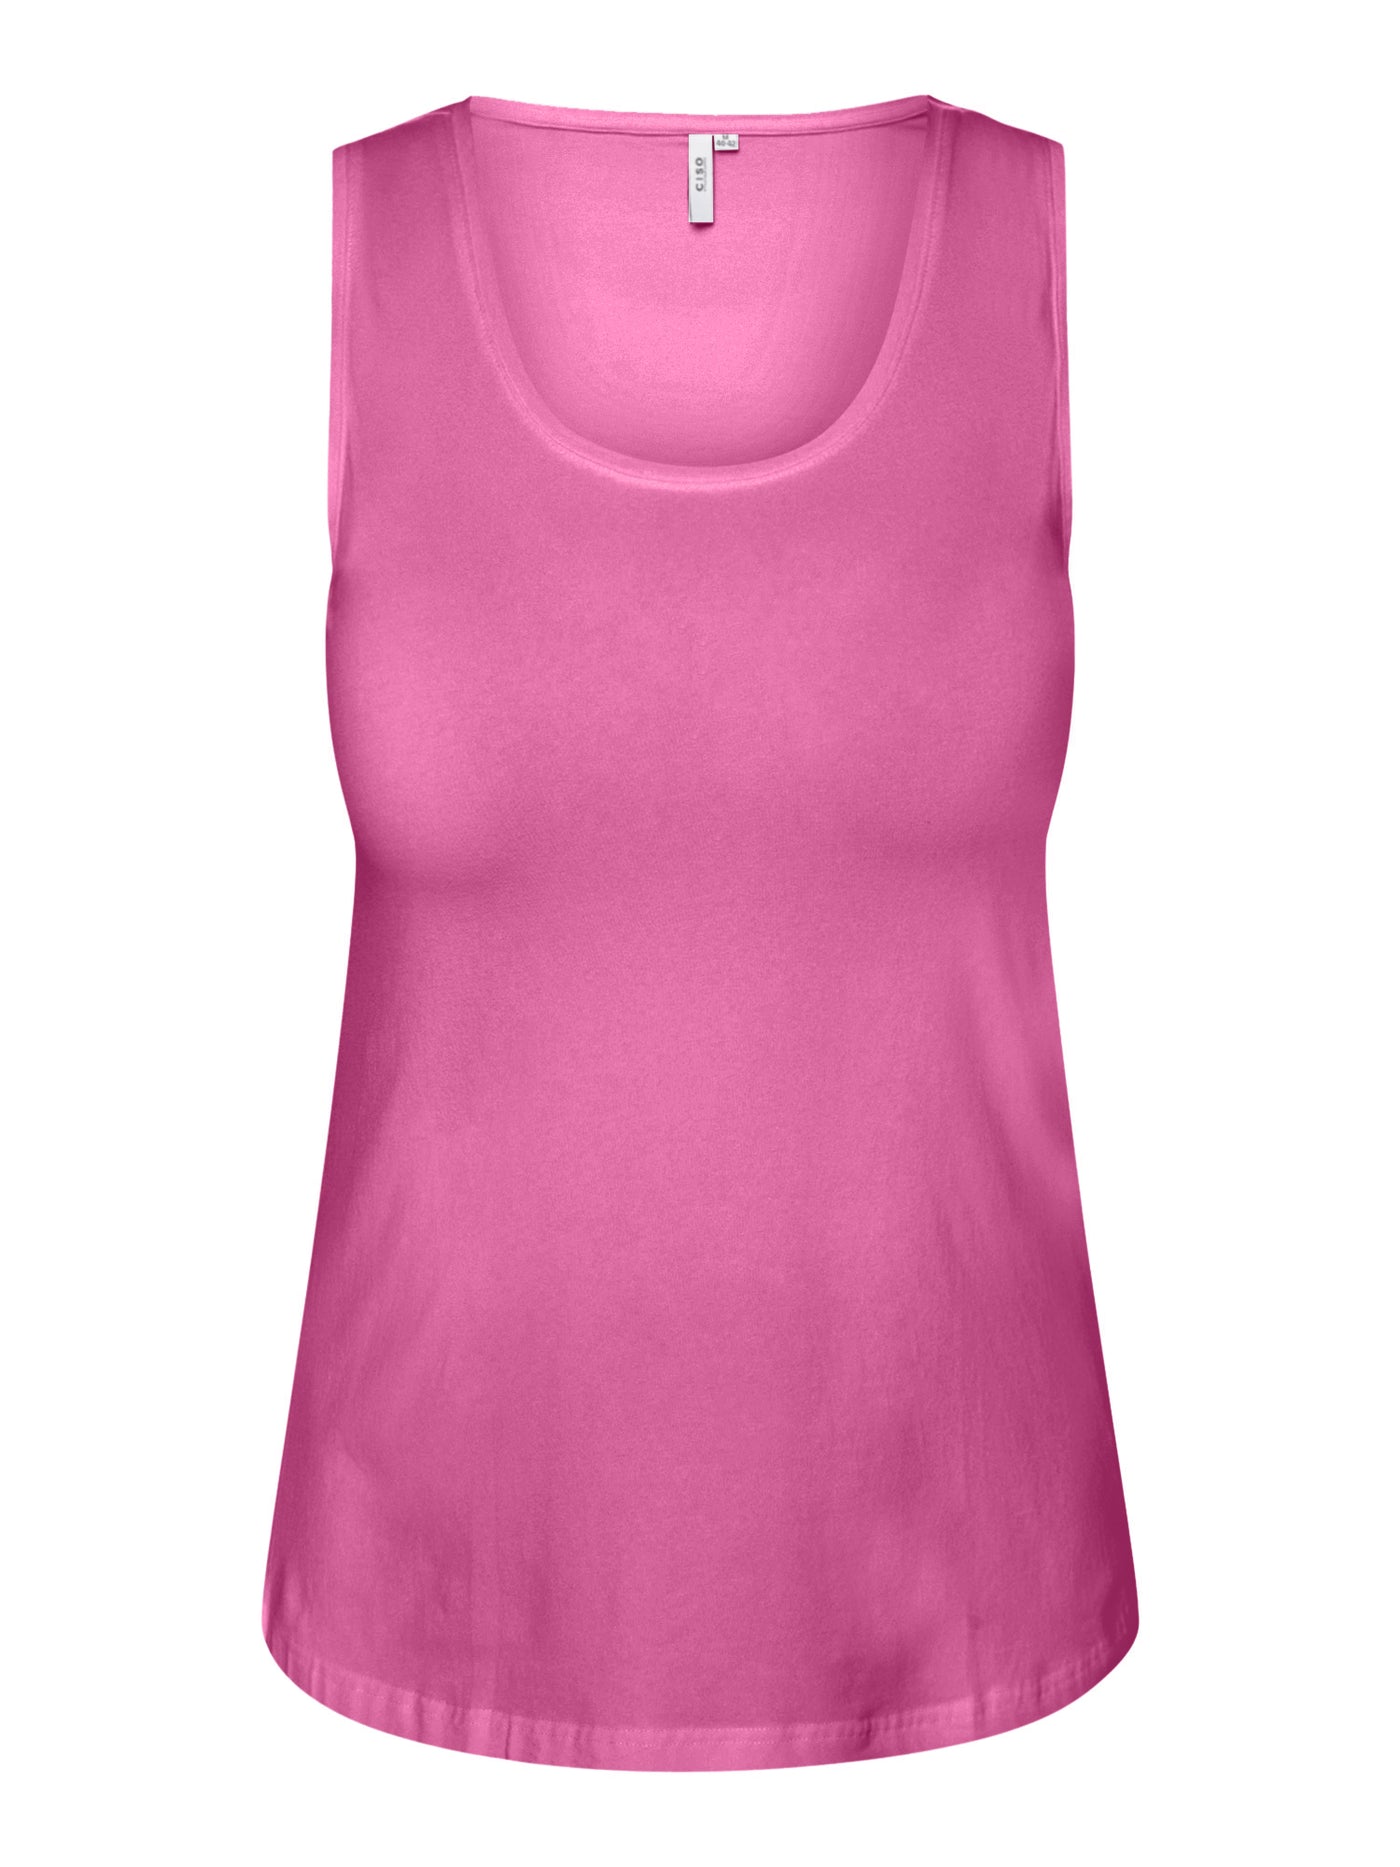 Basis A-formet Top - Strawberry Pink